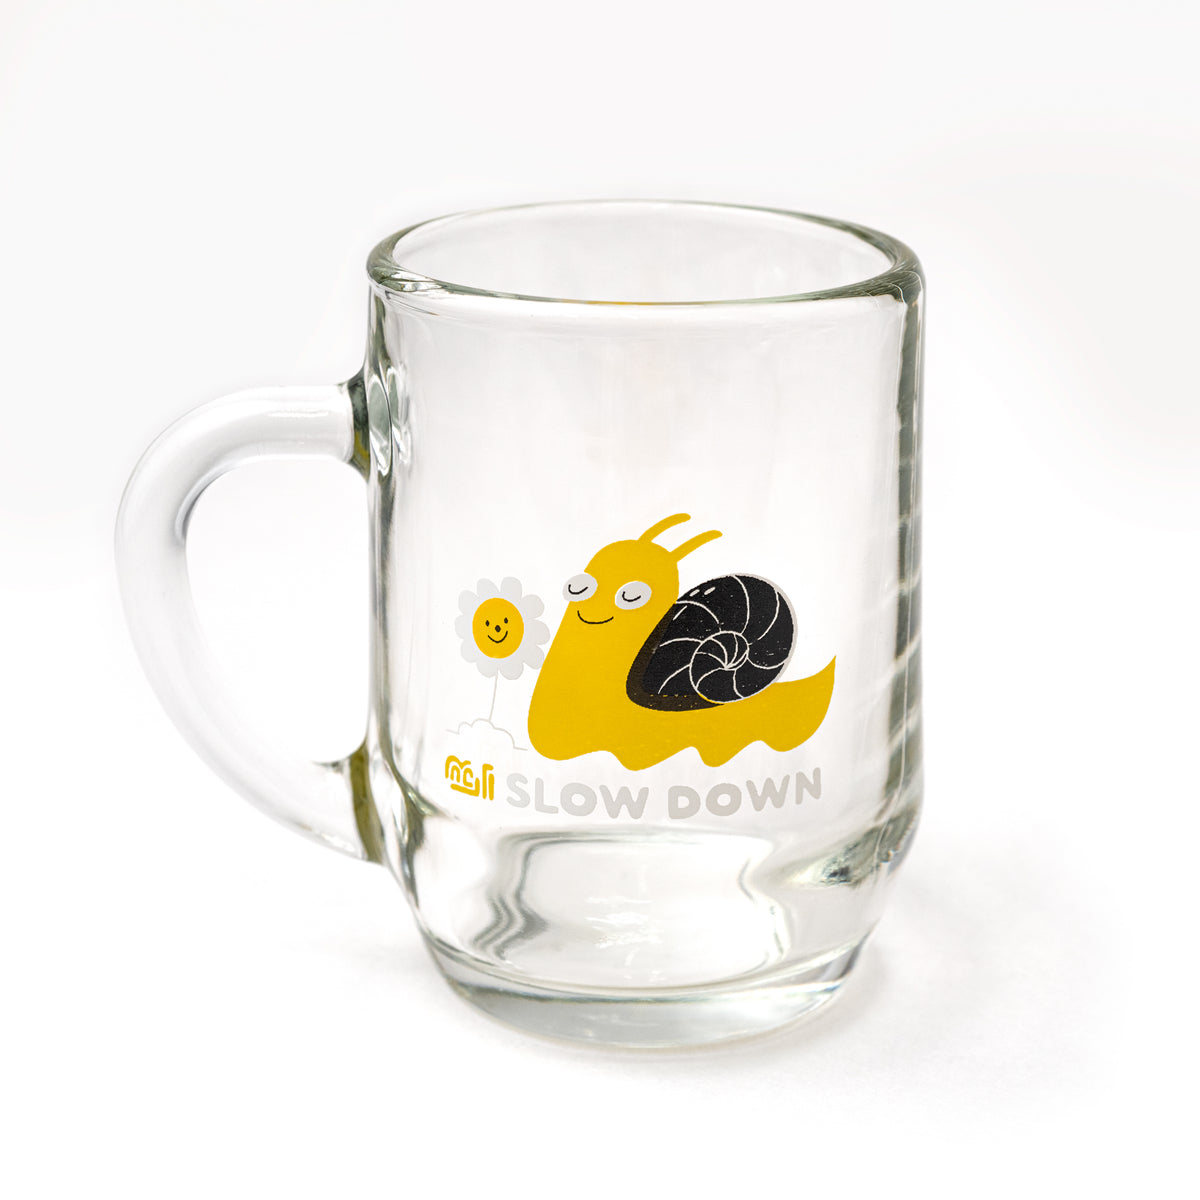 A Blackwing Slow Down Snail Mug with a snail illustration.